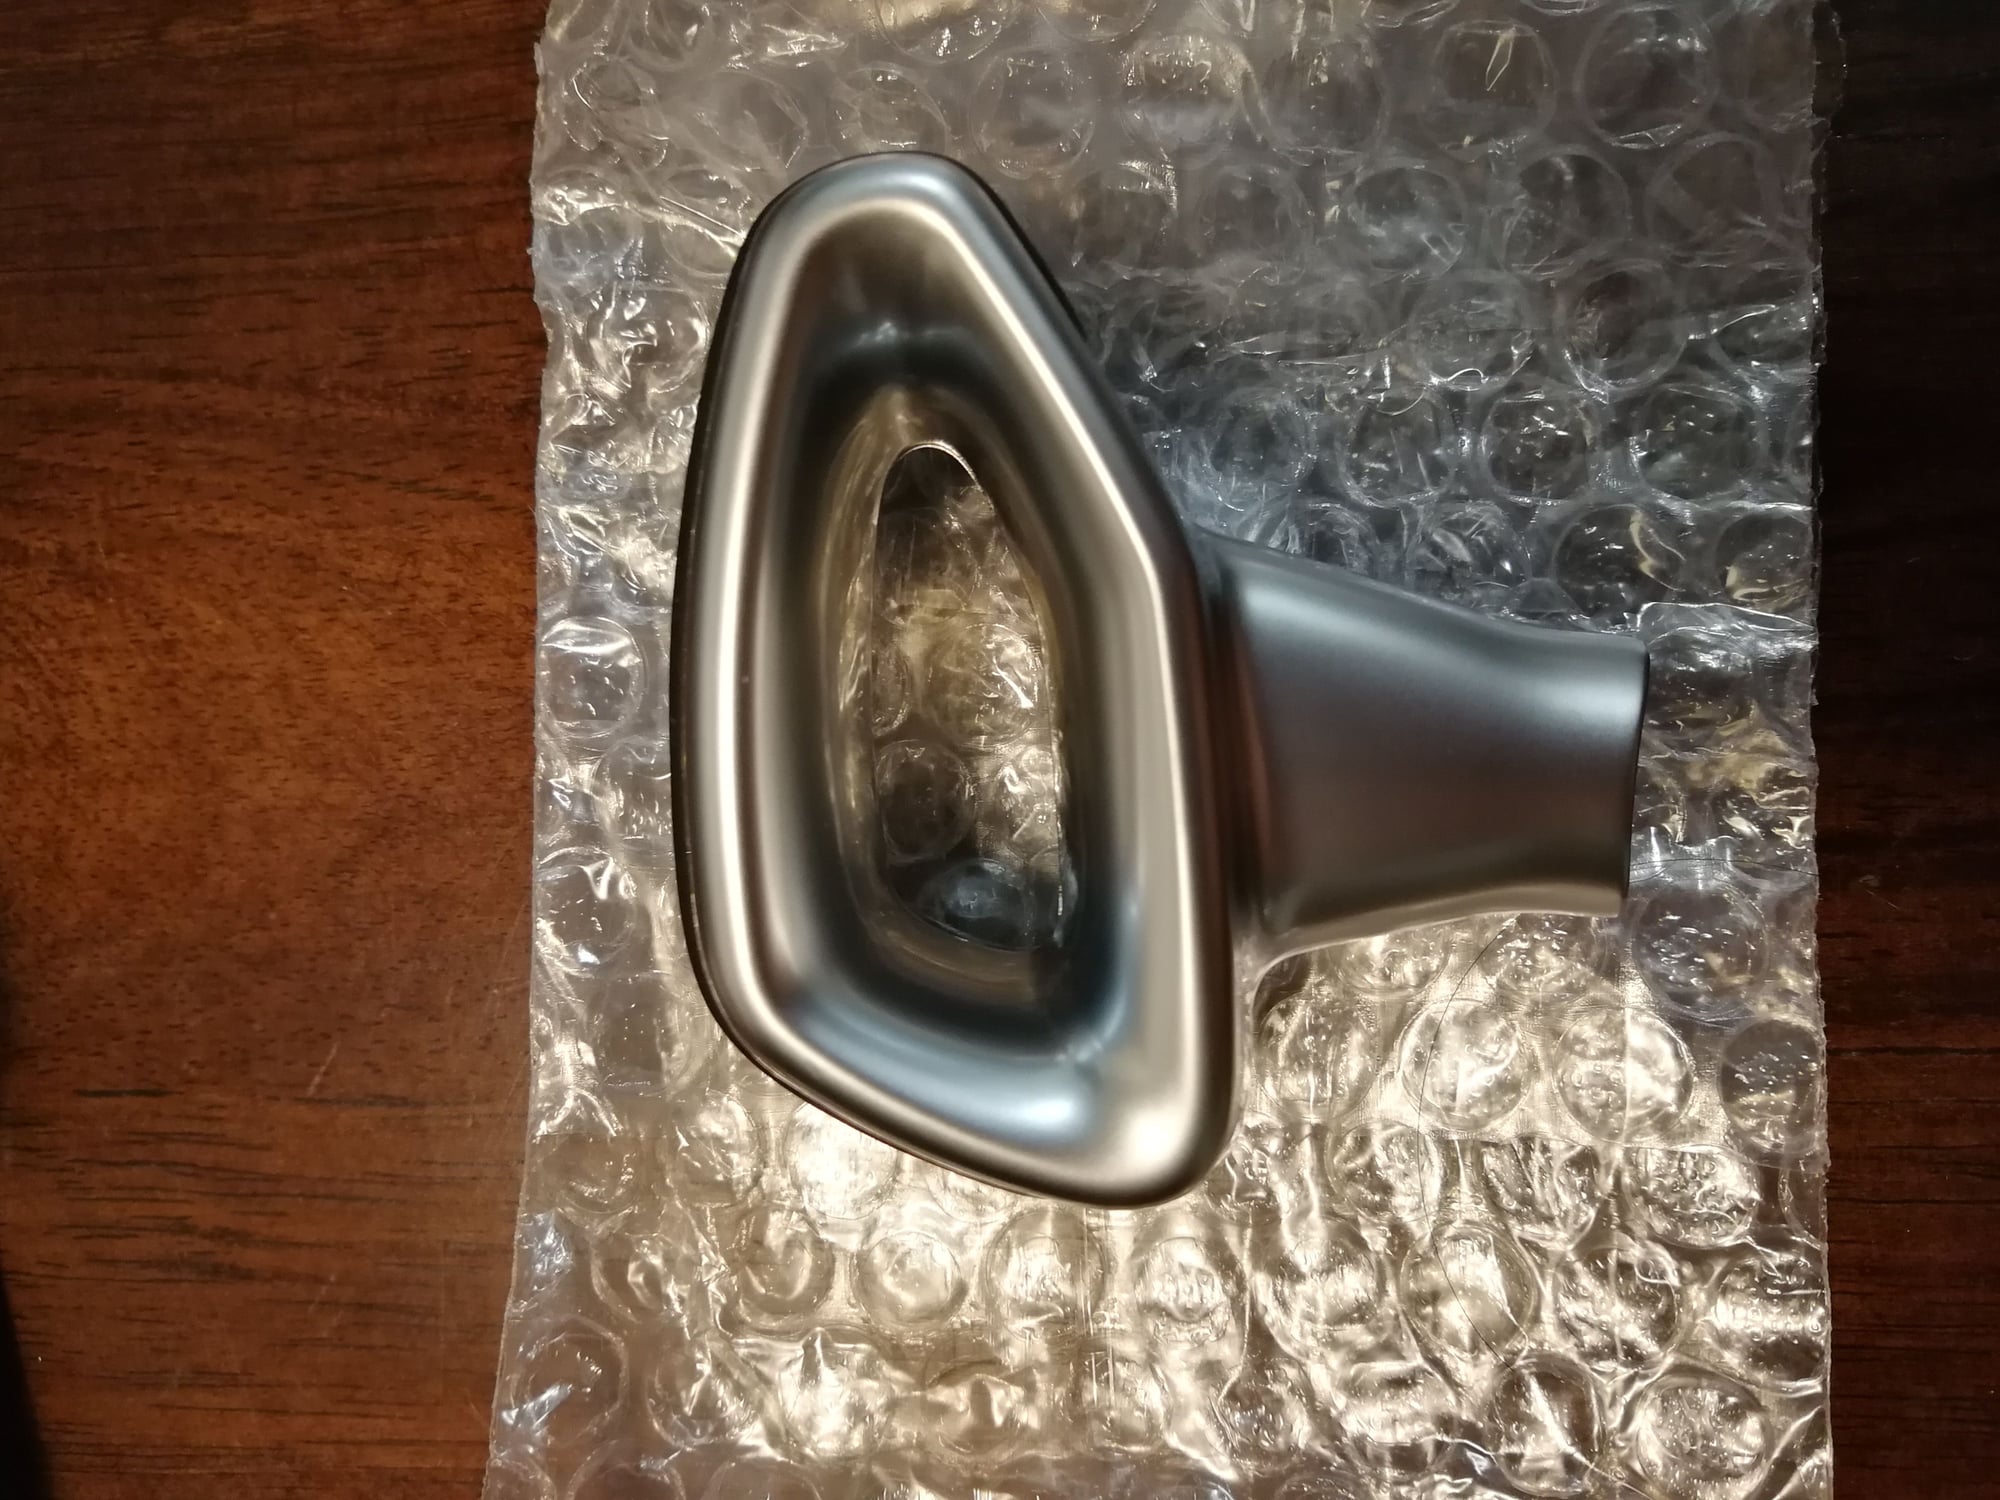 Interior/Upholstery - FS: Brand New, NIB, never installed facelifted AMG shift knob. - New - 2012 to 2017 Mercedes-Benz E63 AMG S - New York, NY 11415, United States